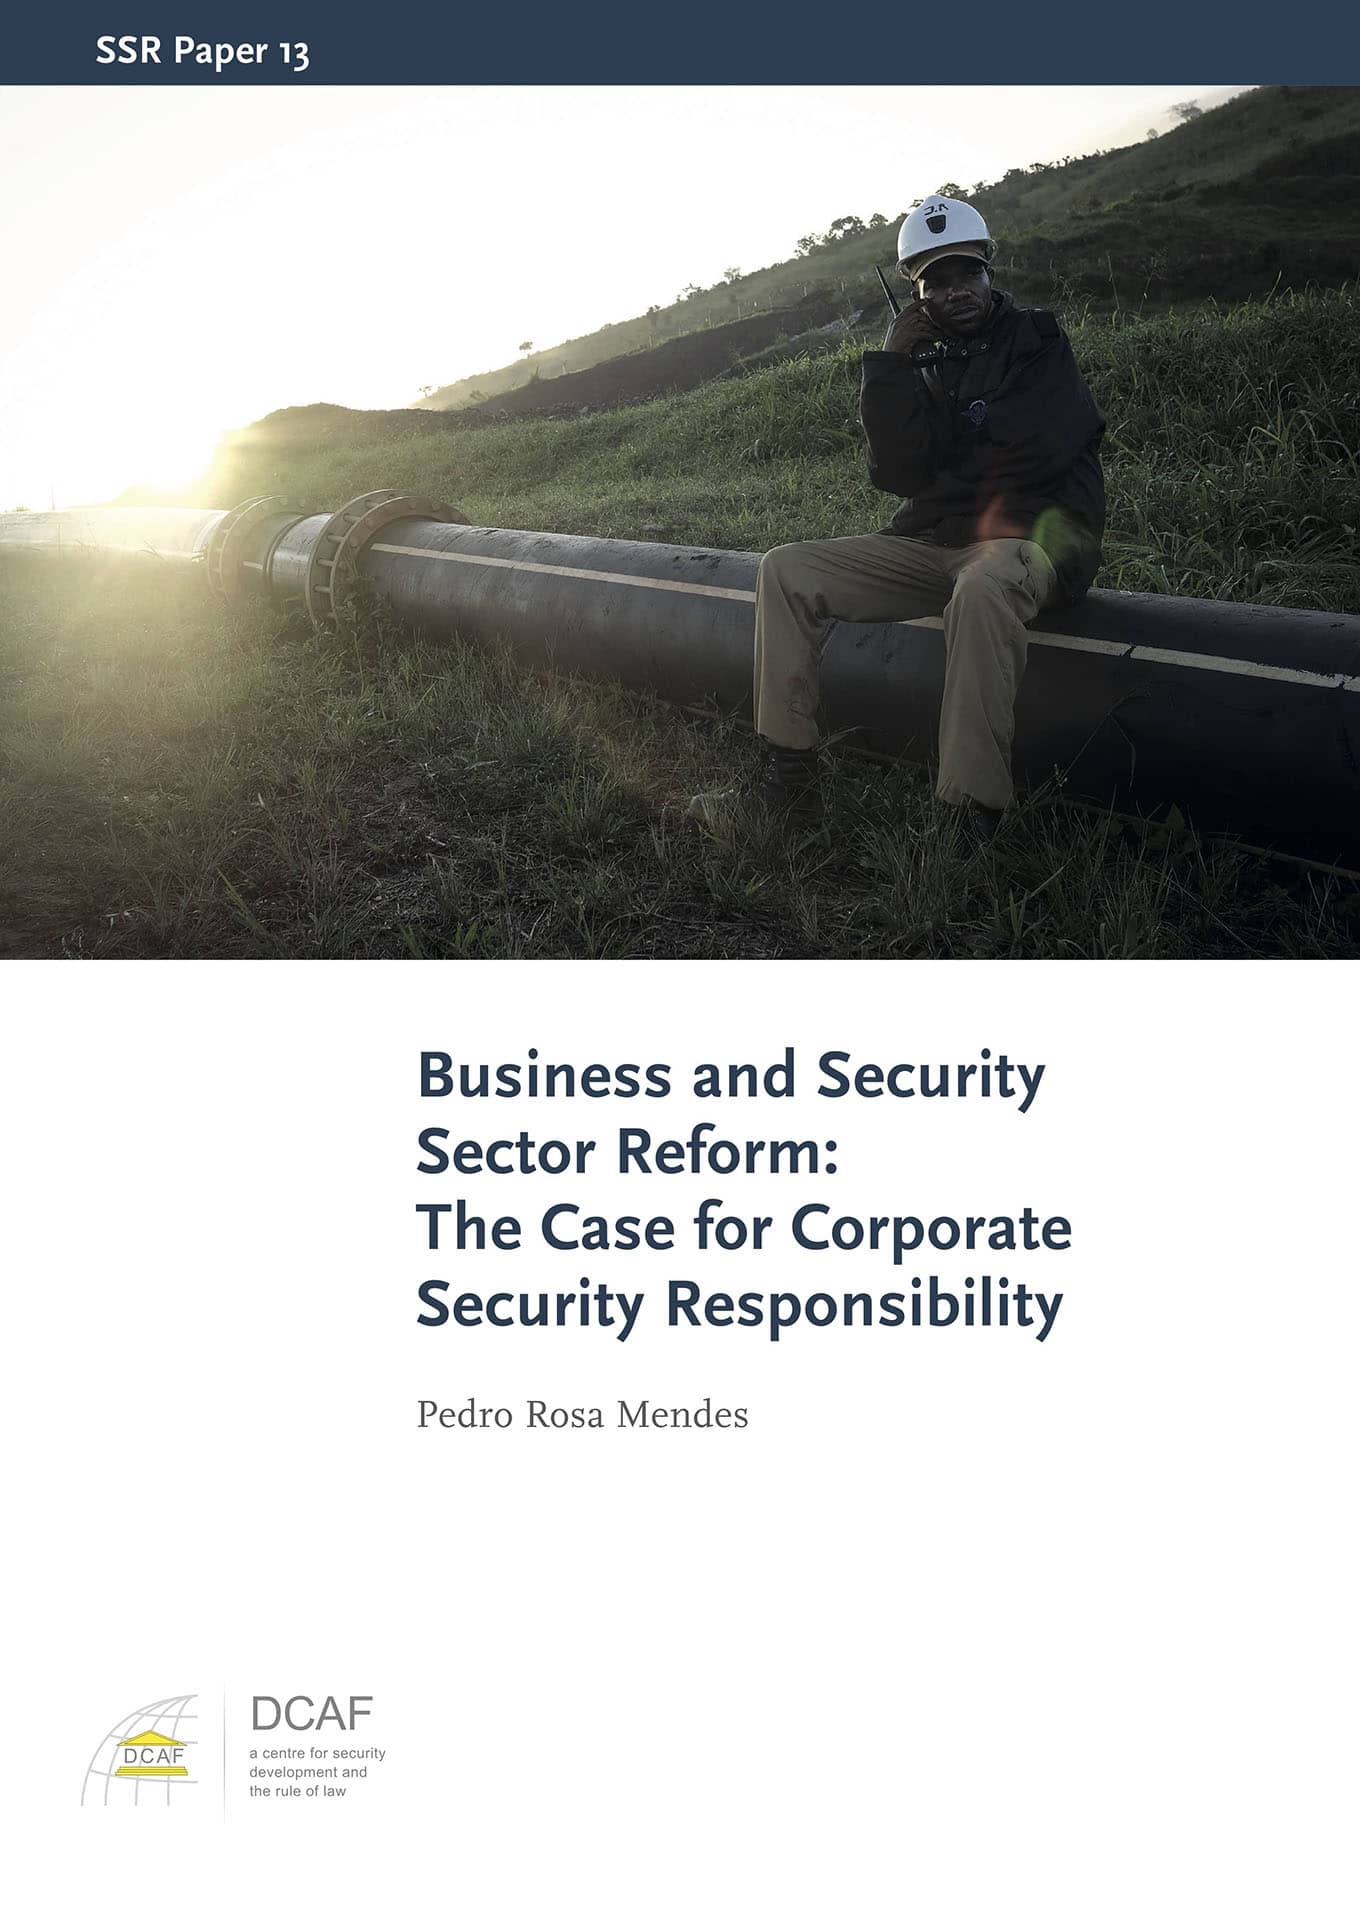 DCAF SSR Paper 13 - Business and Security Sector Reform: The Case for Corporate Security Responsibility (Mendes, 2015)